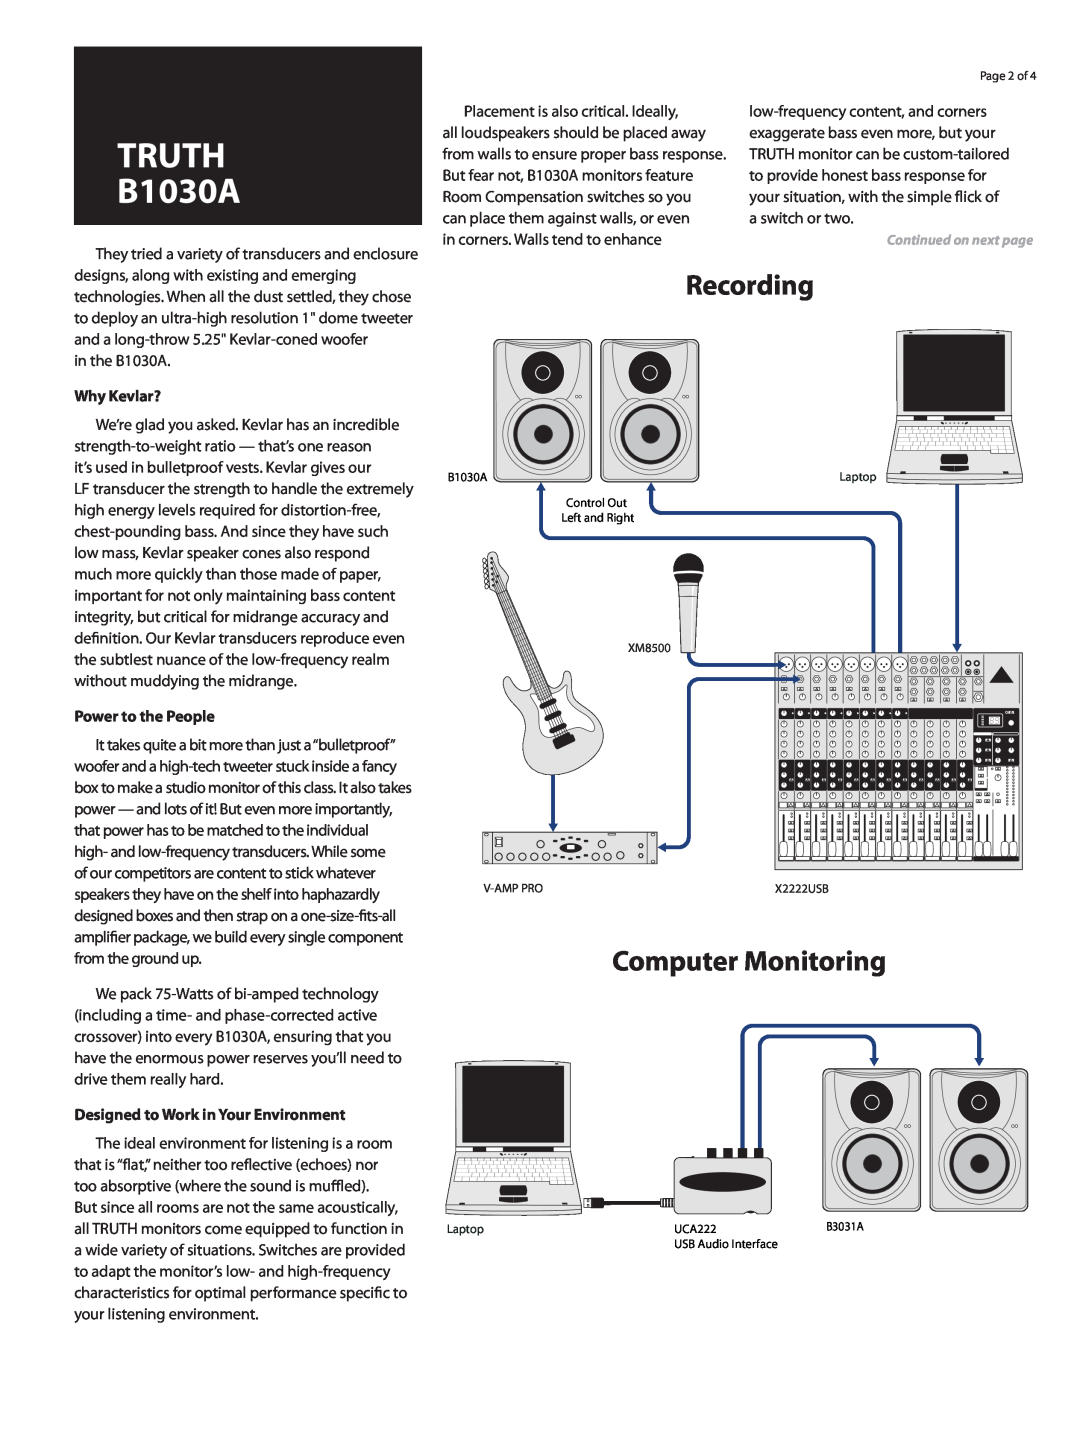 Behringer B1030A Recording, Computer Monitoring, Why Kevlar?, Power to the People, Designed to Work in Your Environment 